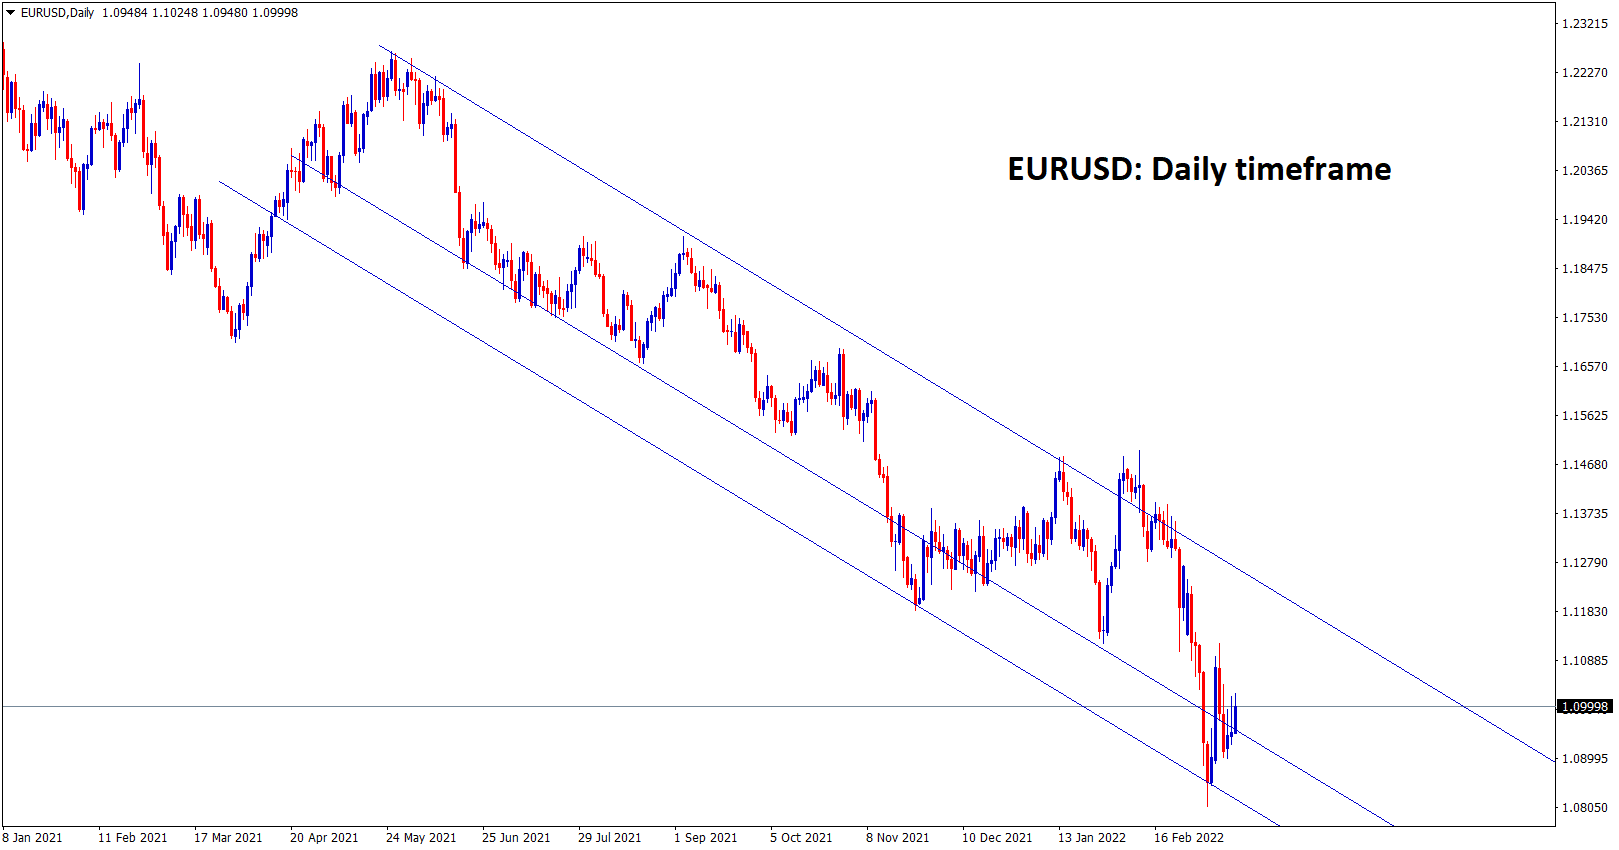 EURUSD moving in a downtrend line